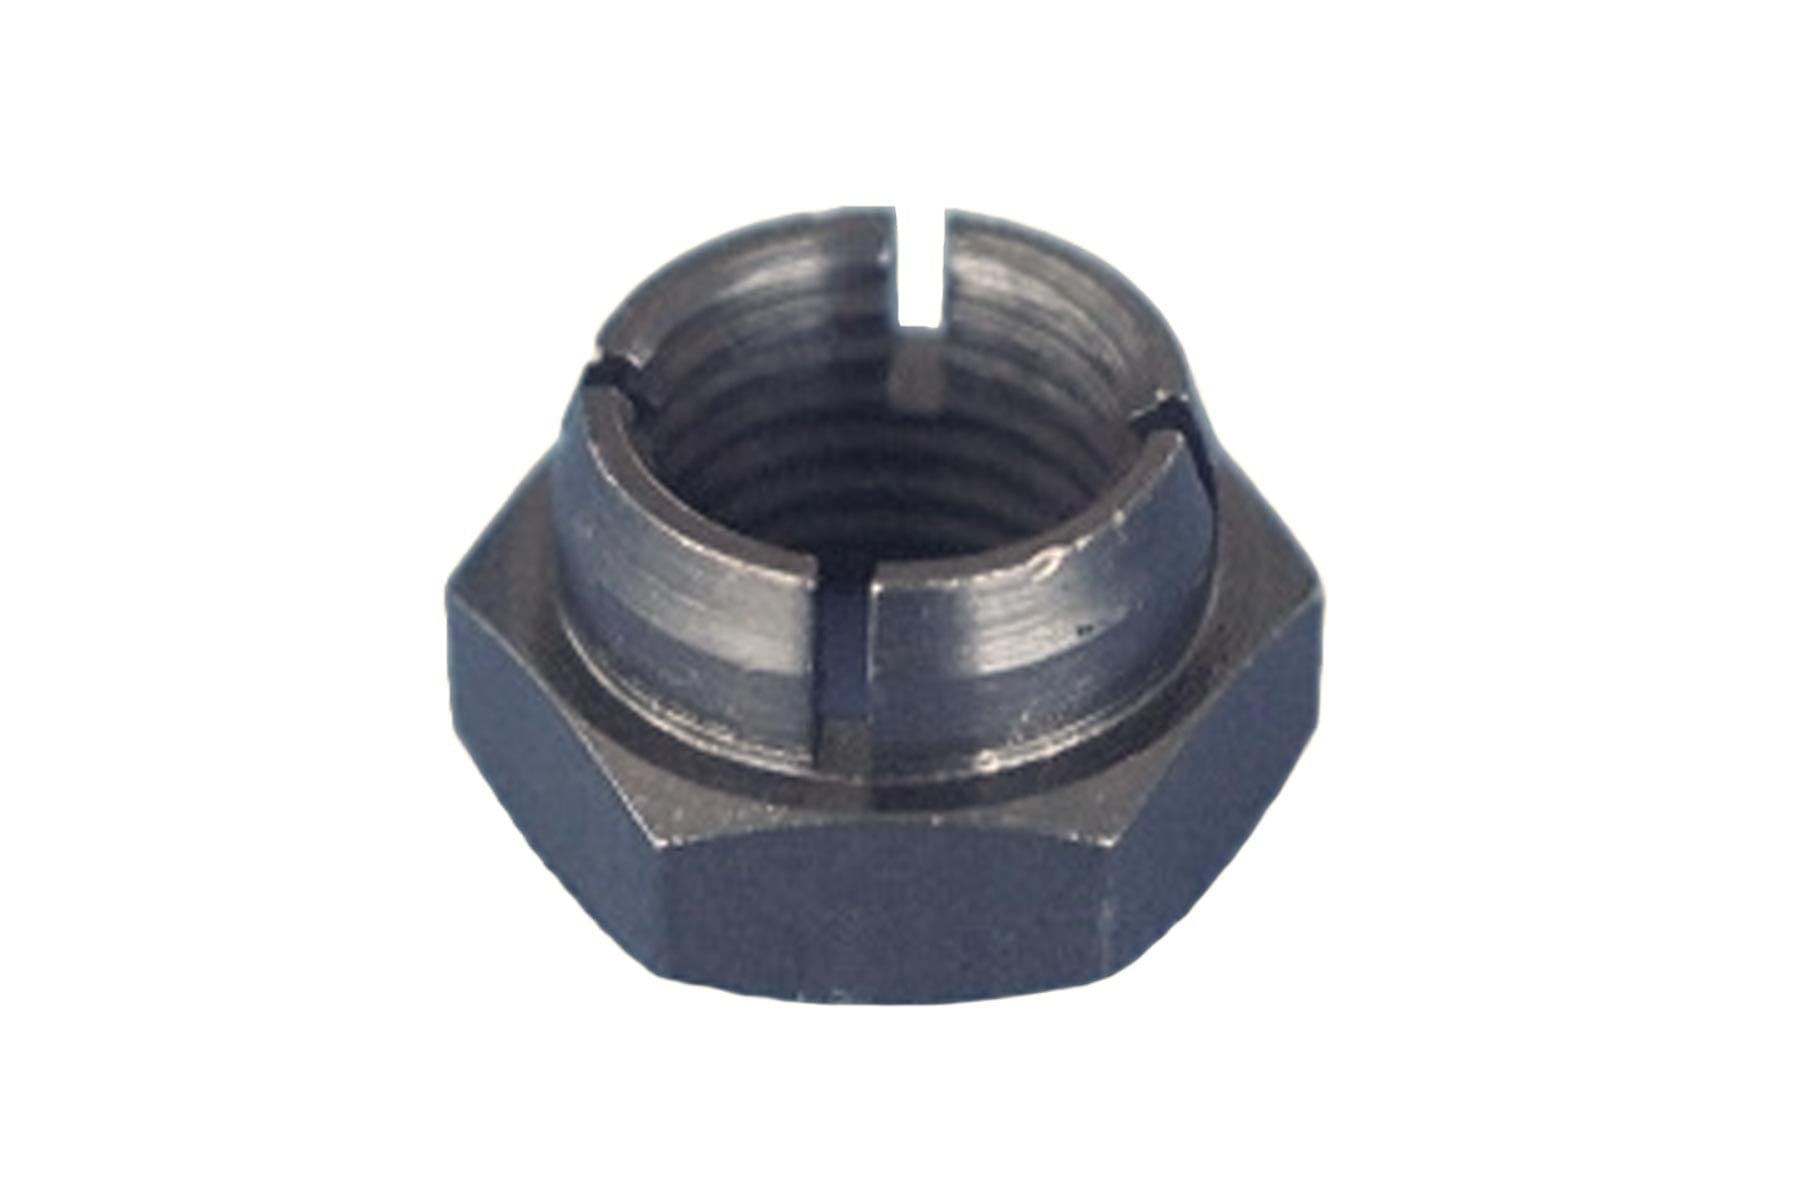 NGH GF38 Replacement Inch Lock Nut NGH-6237